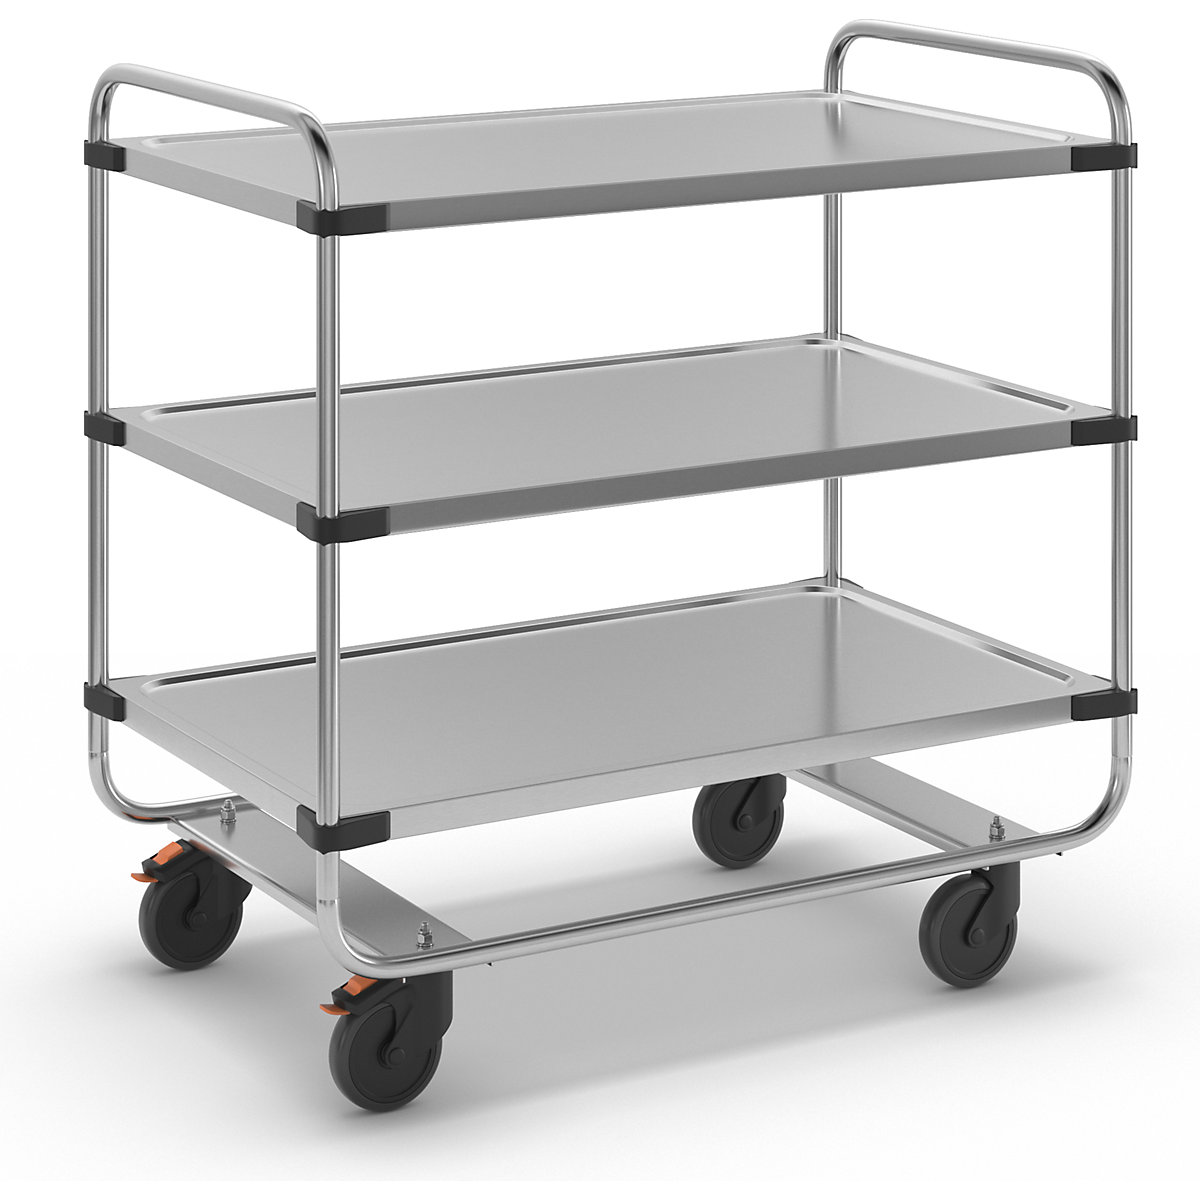 Stainless steel serving trolley, assembled, with 3 shelves, LxWxH 1035 x 635 x 1040 mm-1